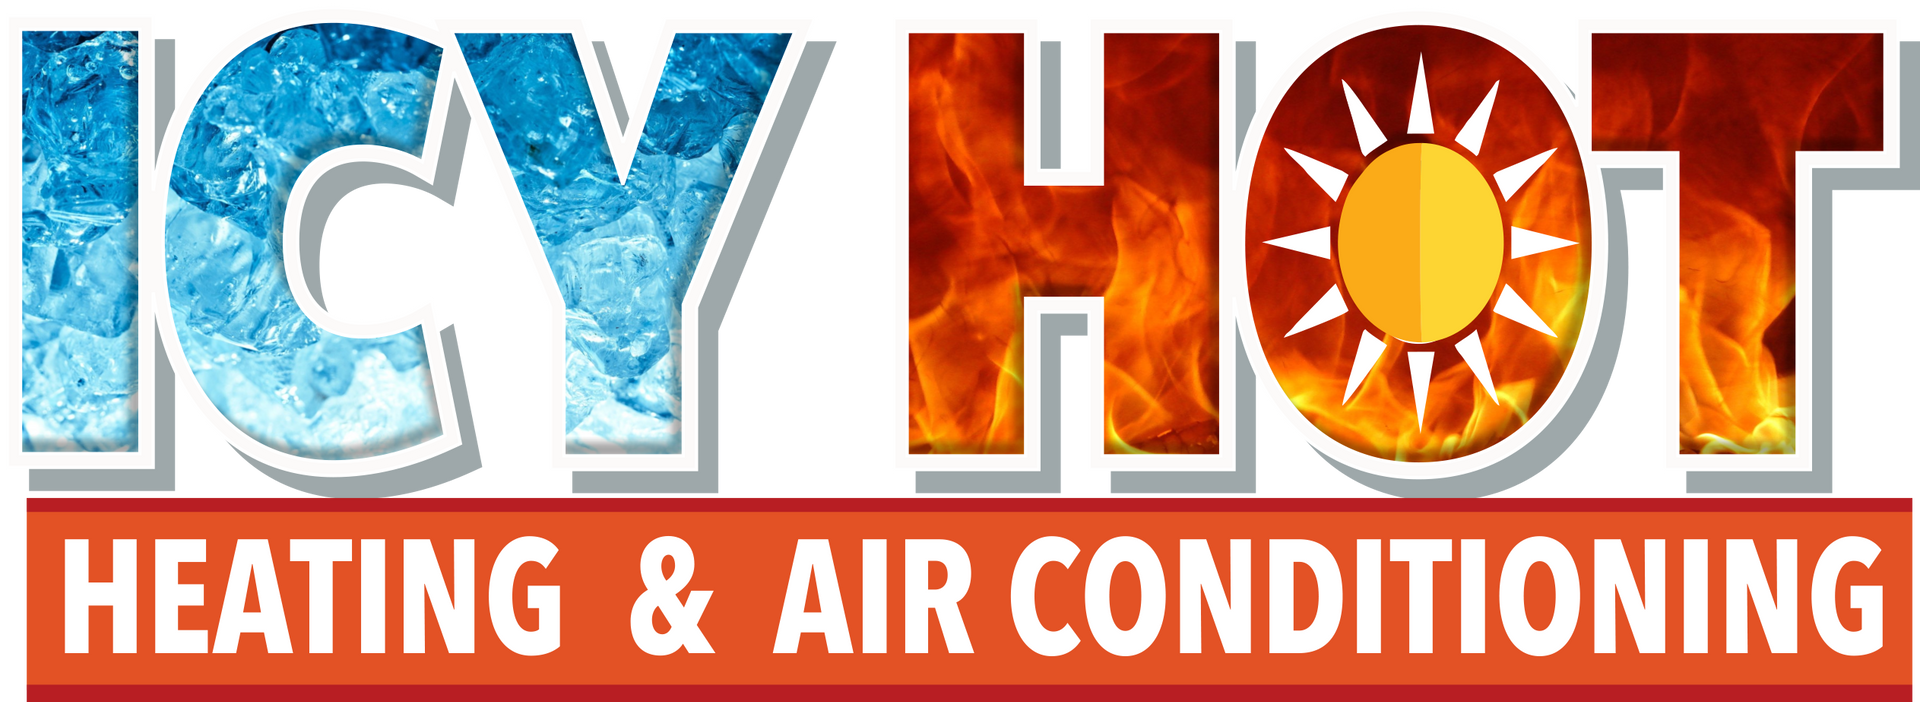 Icy Hot Heating and Air Conditioning Inc - Logo 